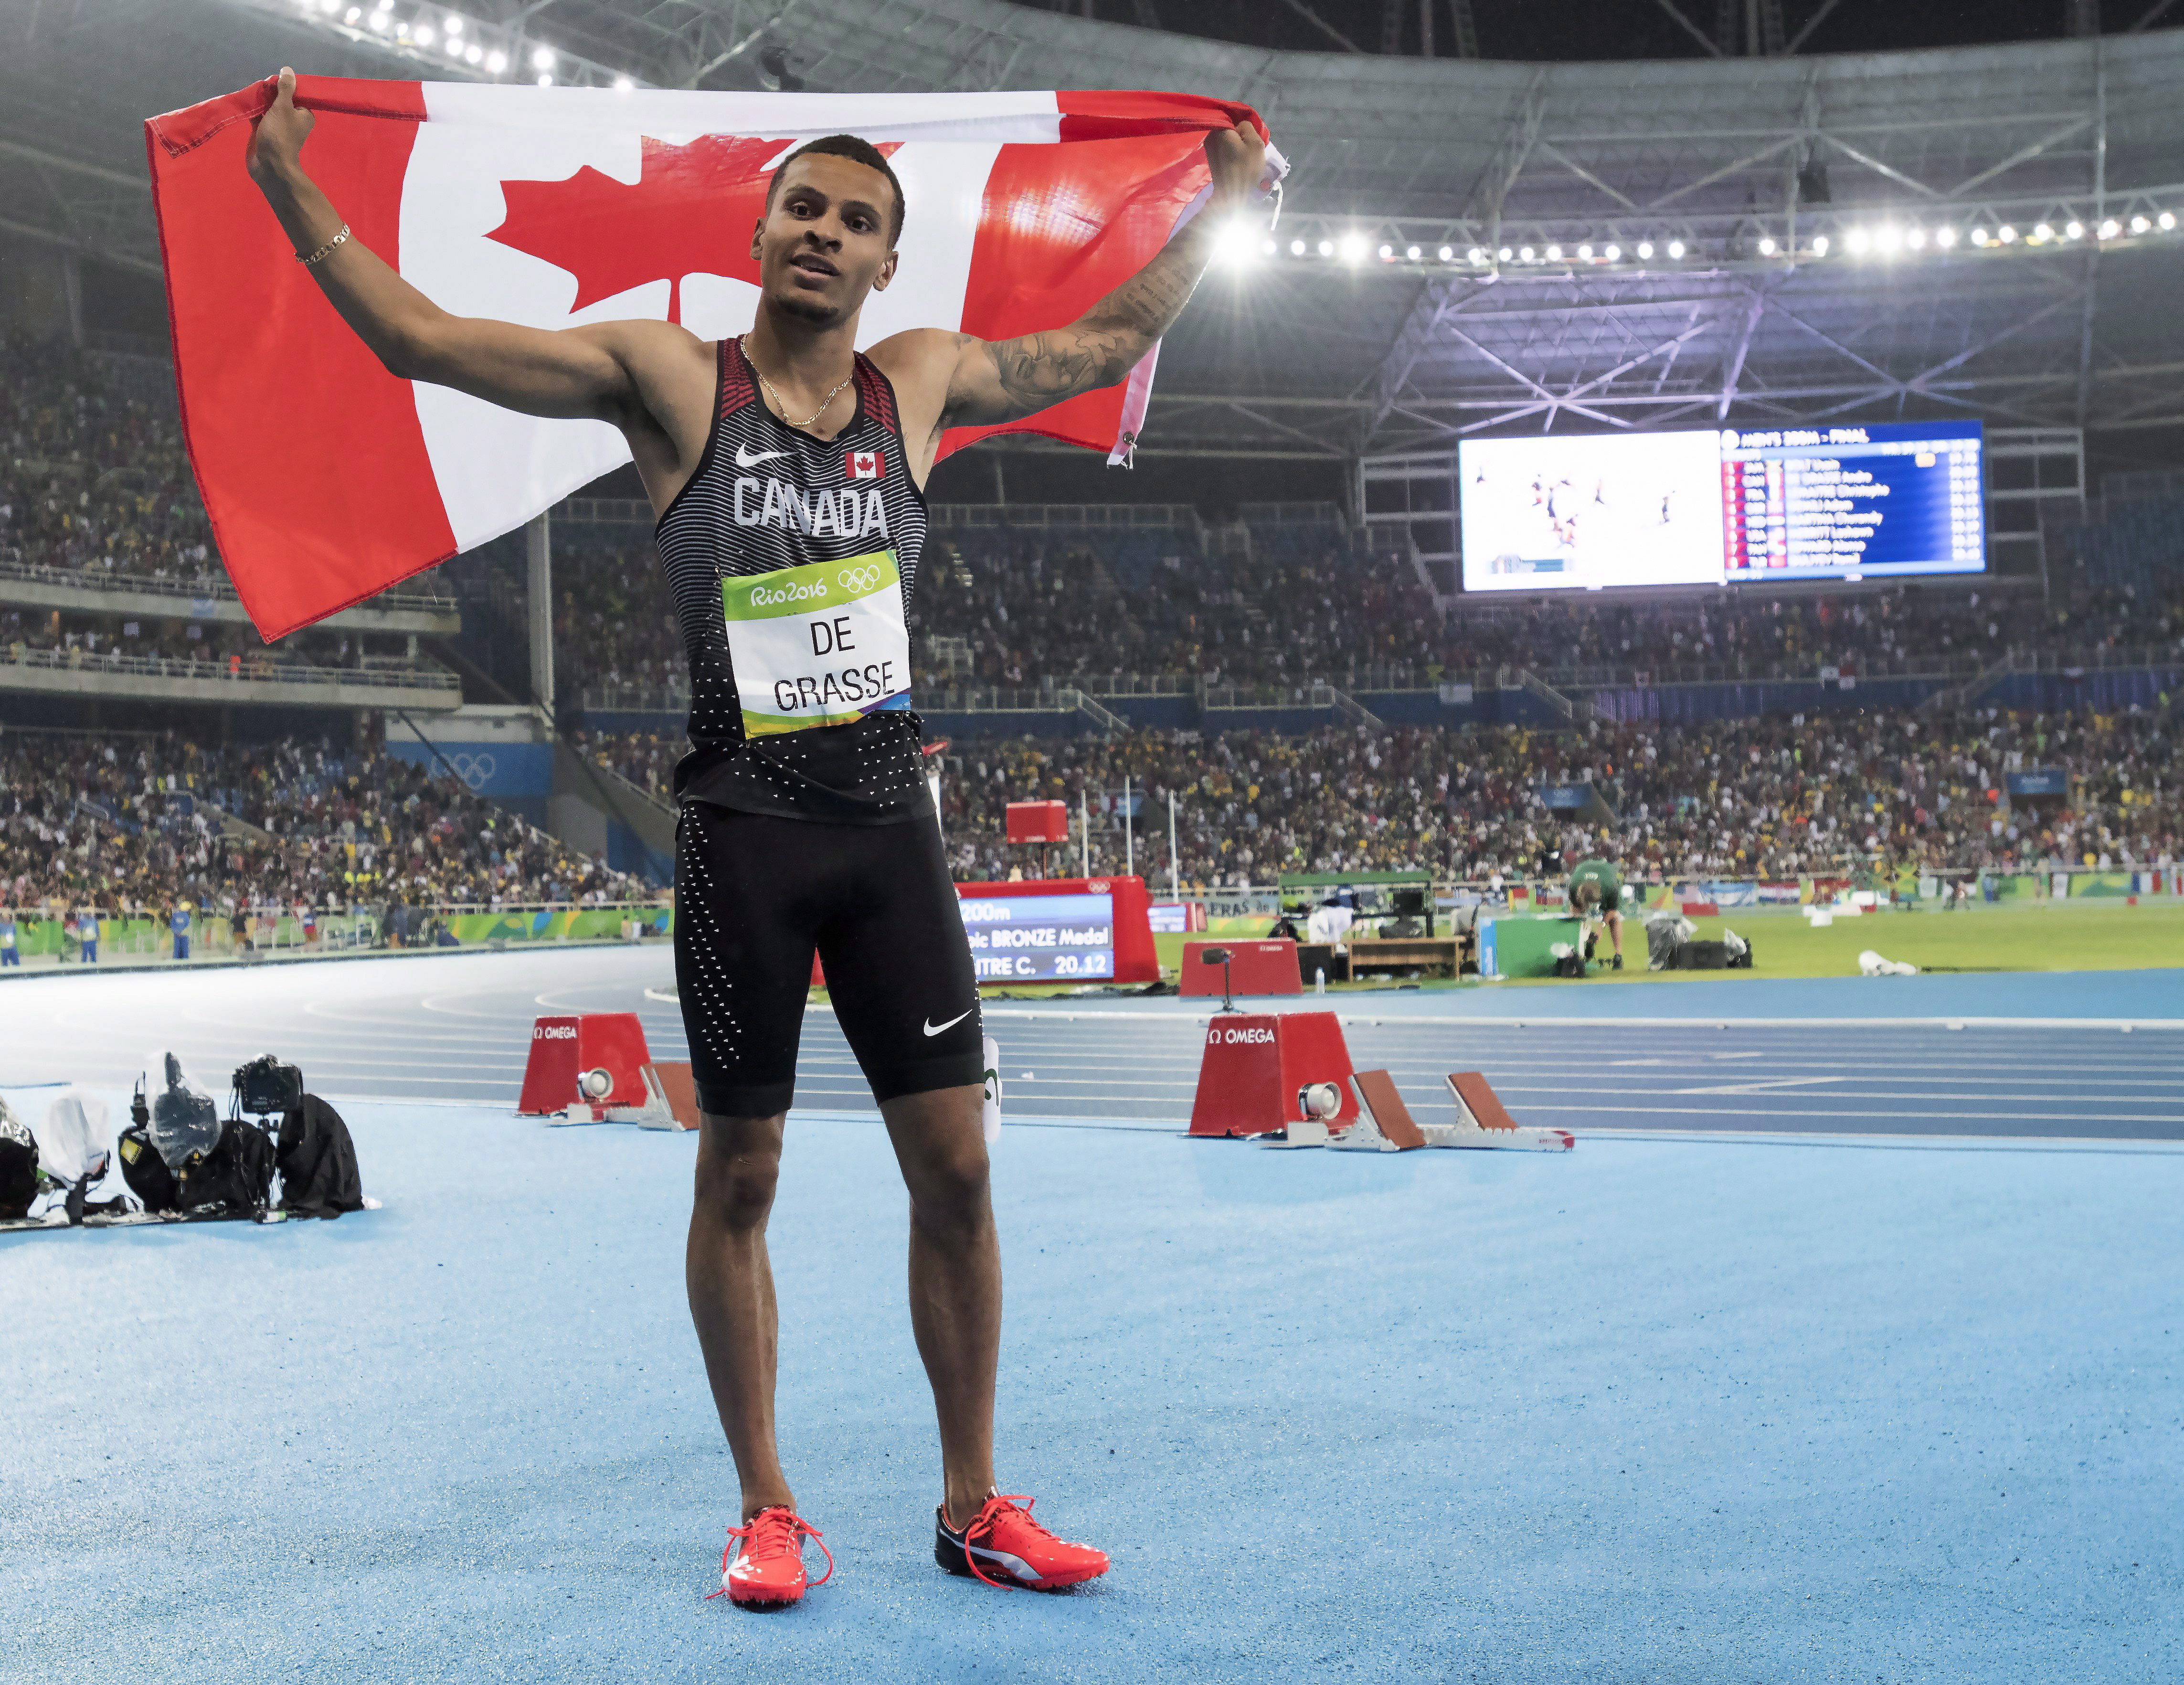 Andre De Grasse holds the Canadian flag over his head celebrating his Silver medal win.